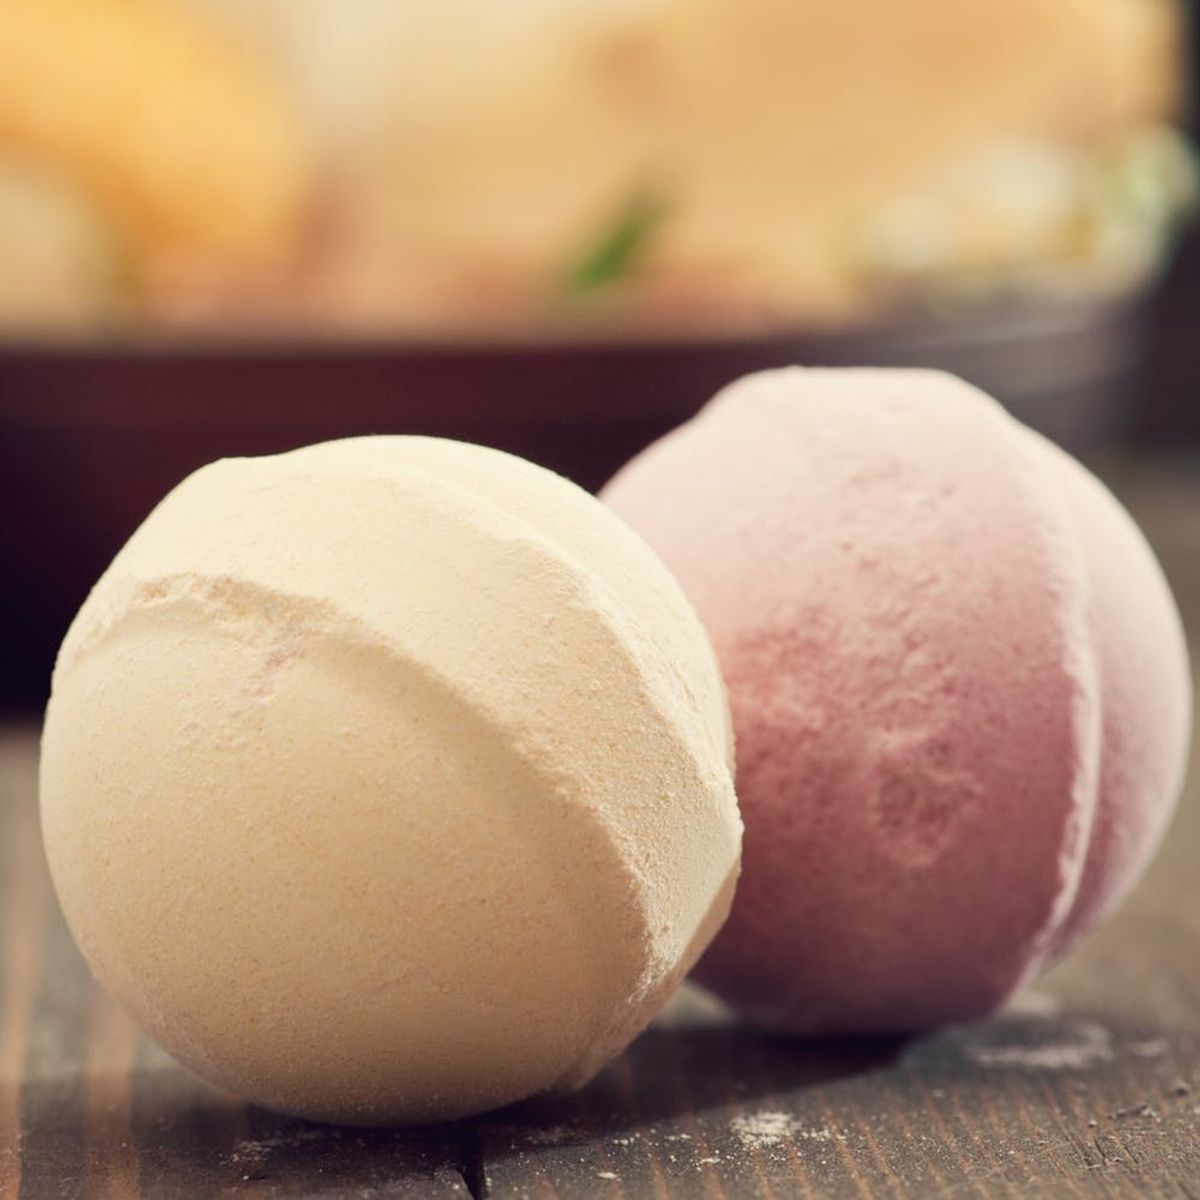 Drop Everything: Edible “Bath Bombs” for Your Cocktails Now Exist